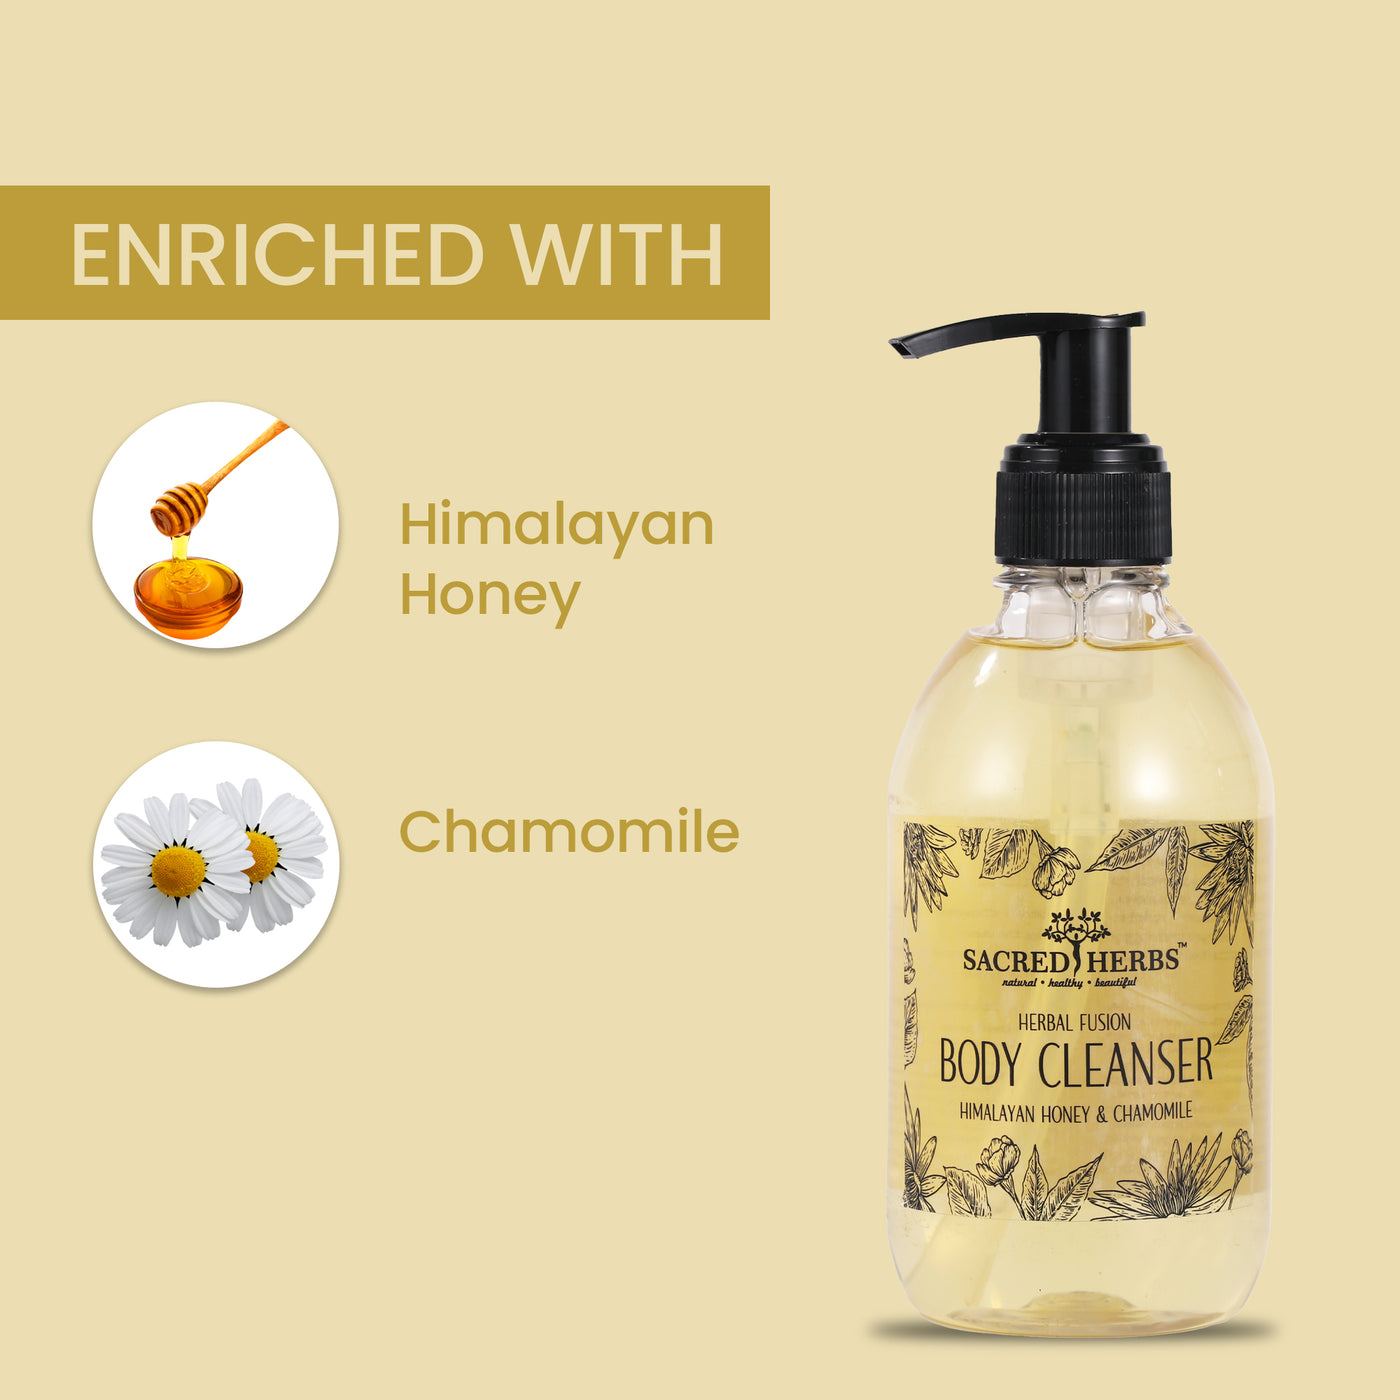 Herbal Fusion Body Cleanser - Himalayan Honey & Chamomile